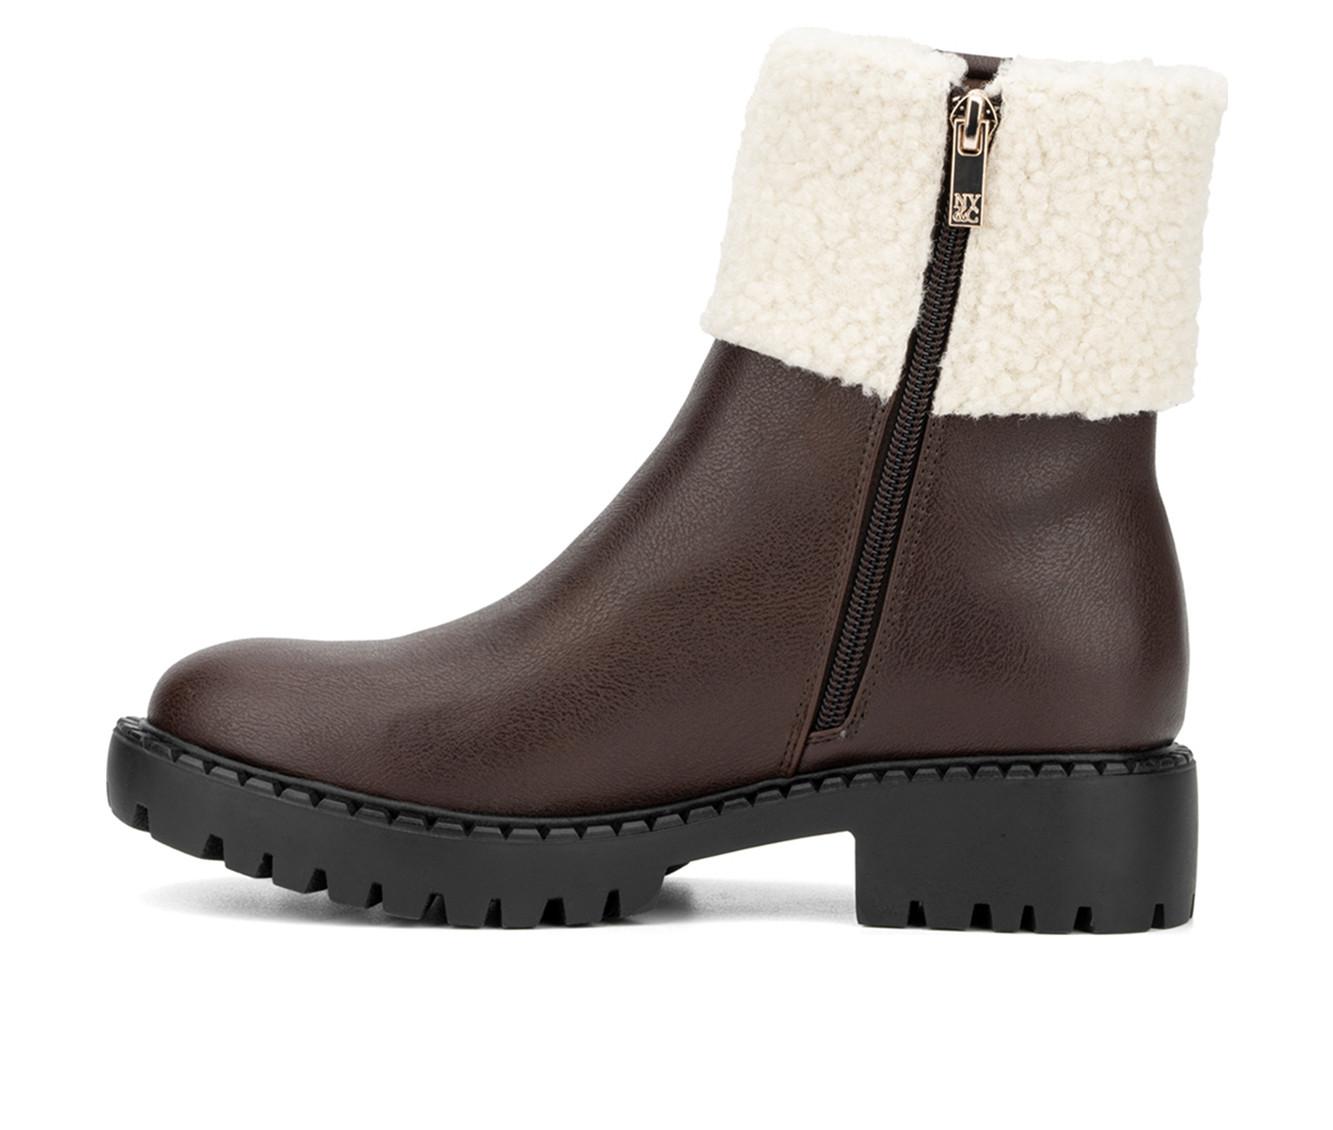 Women's New York and Company Nelli Winter Booties